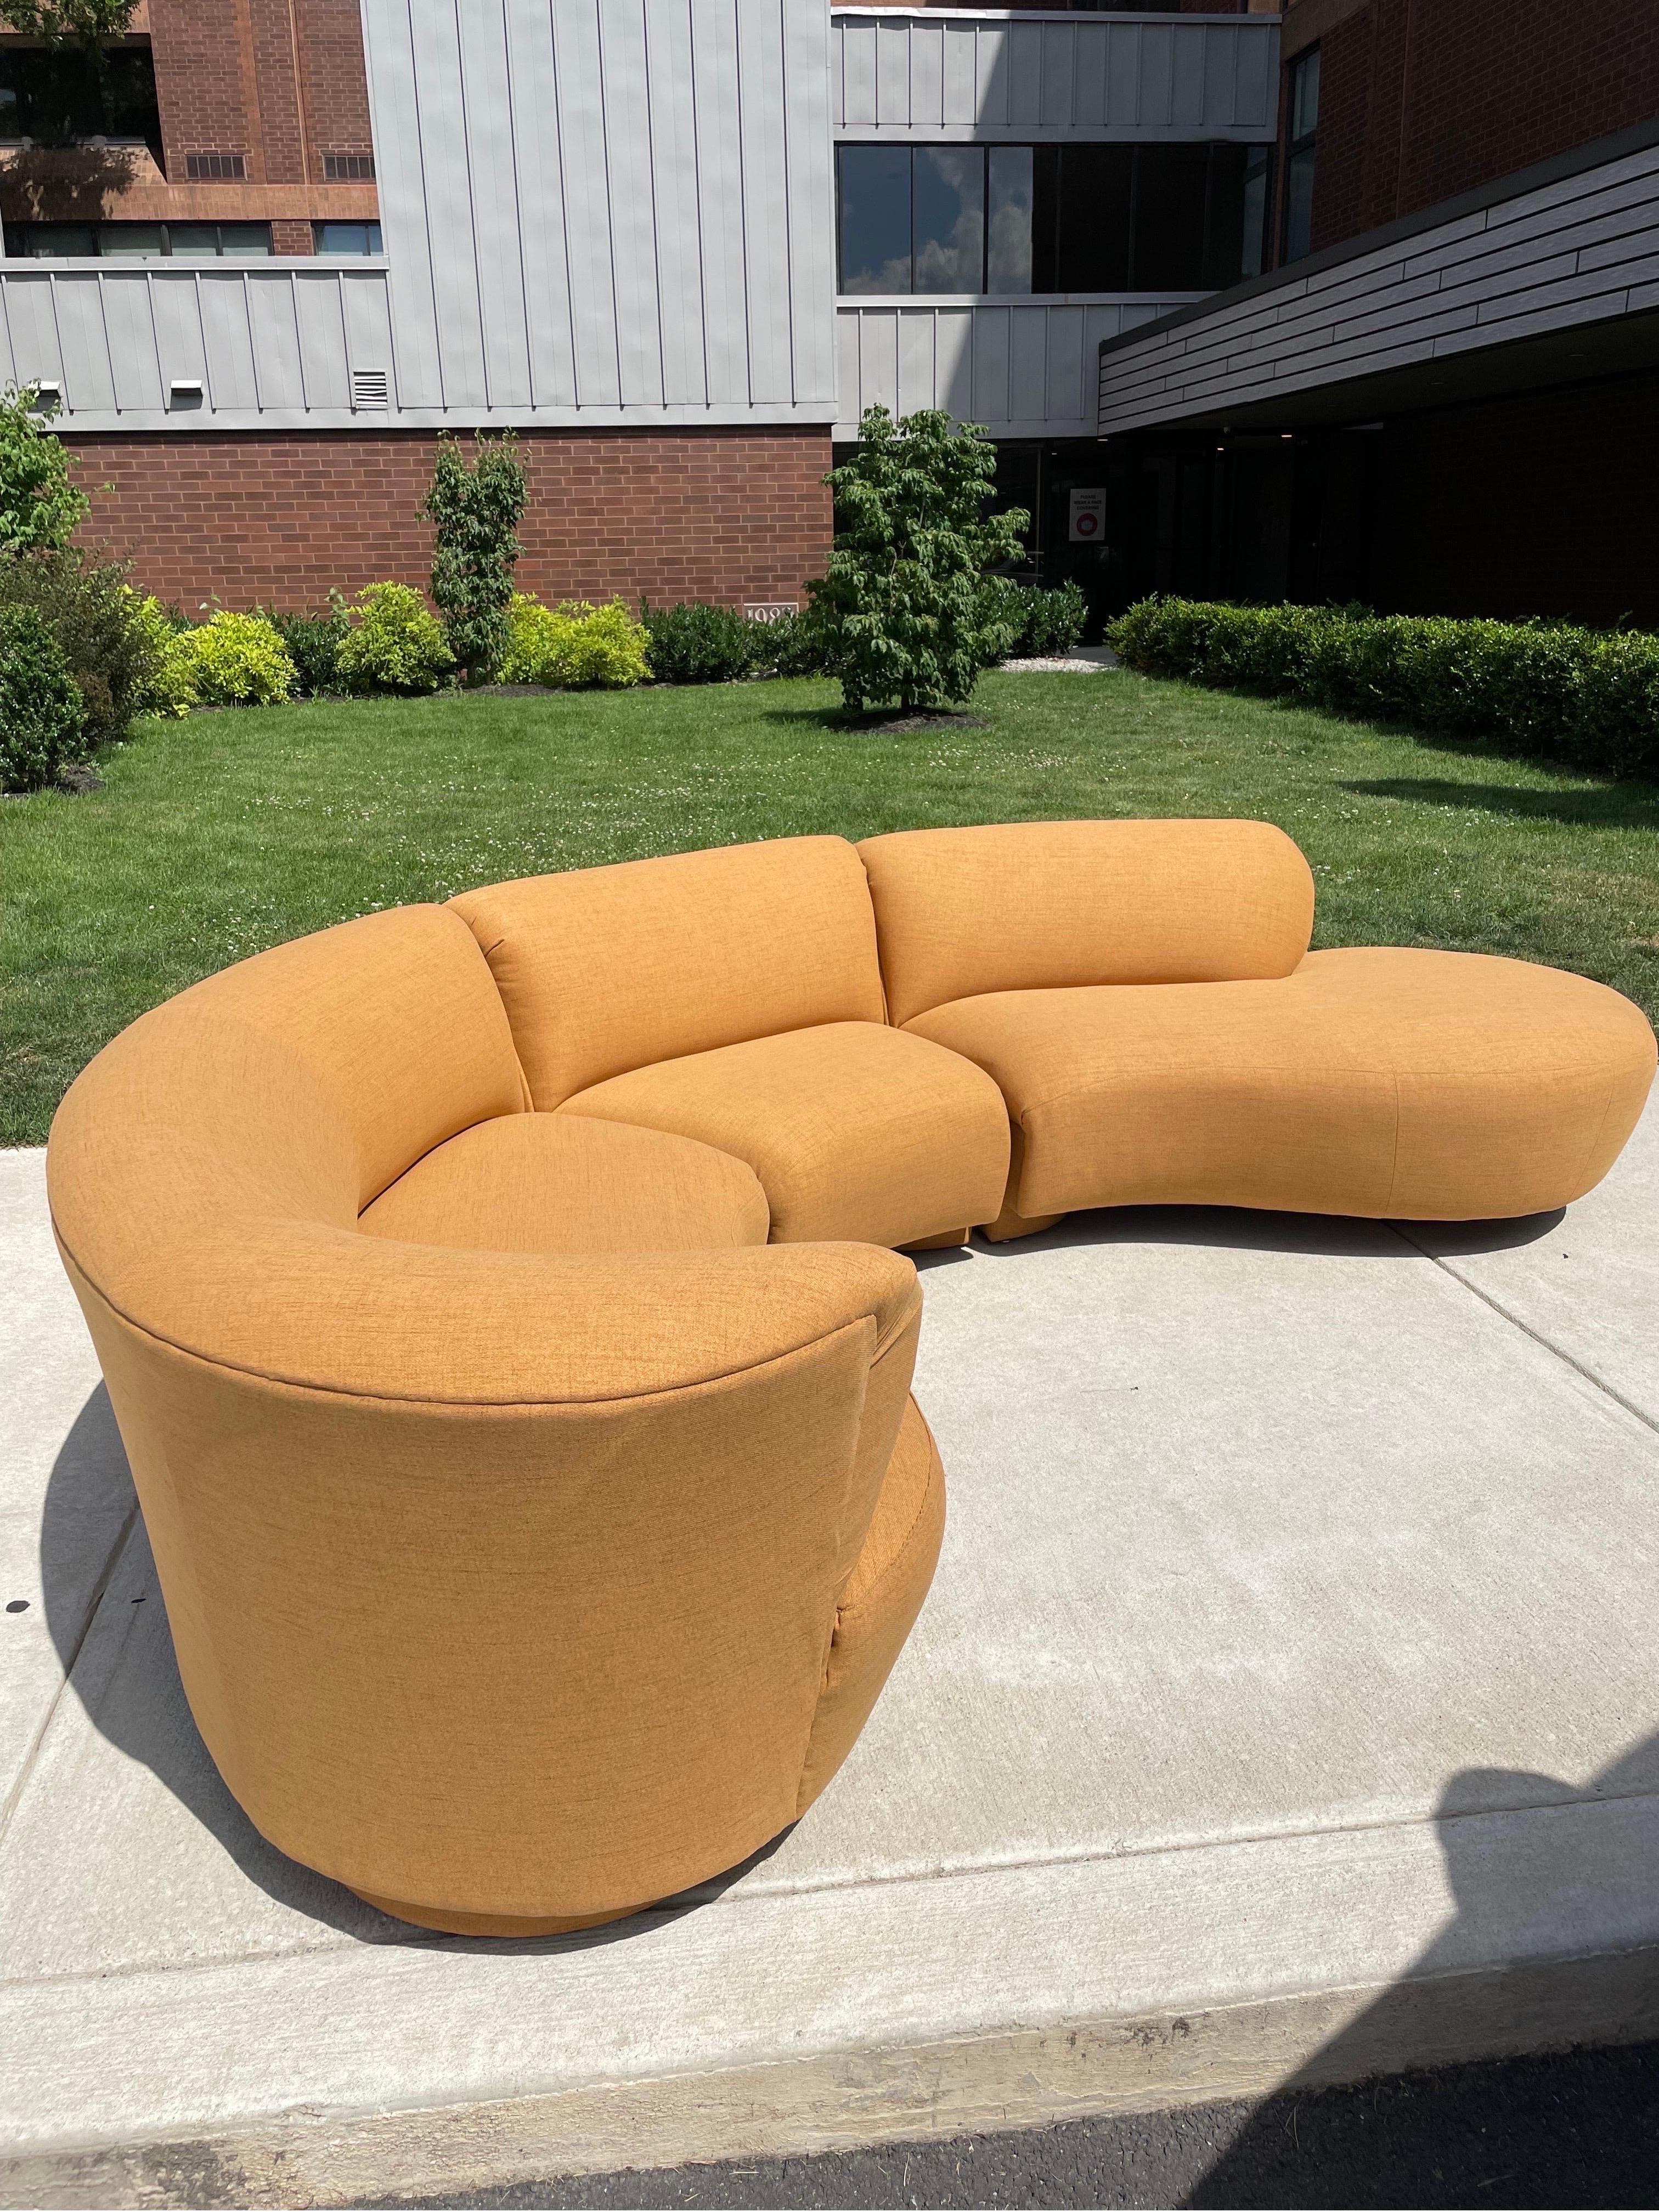 Newly reupholstered vintage Vladimir Kagan for Directional Sectional